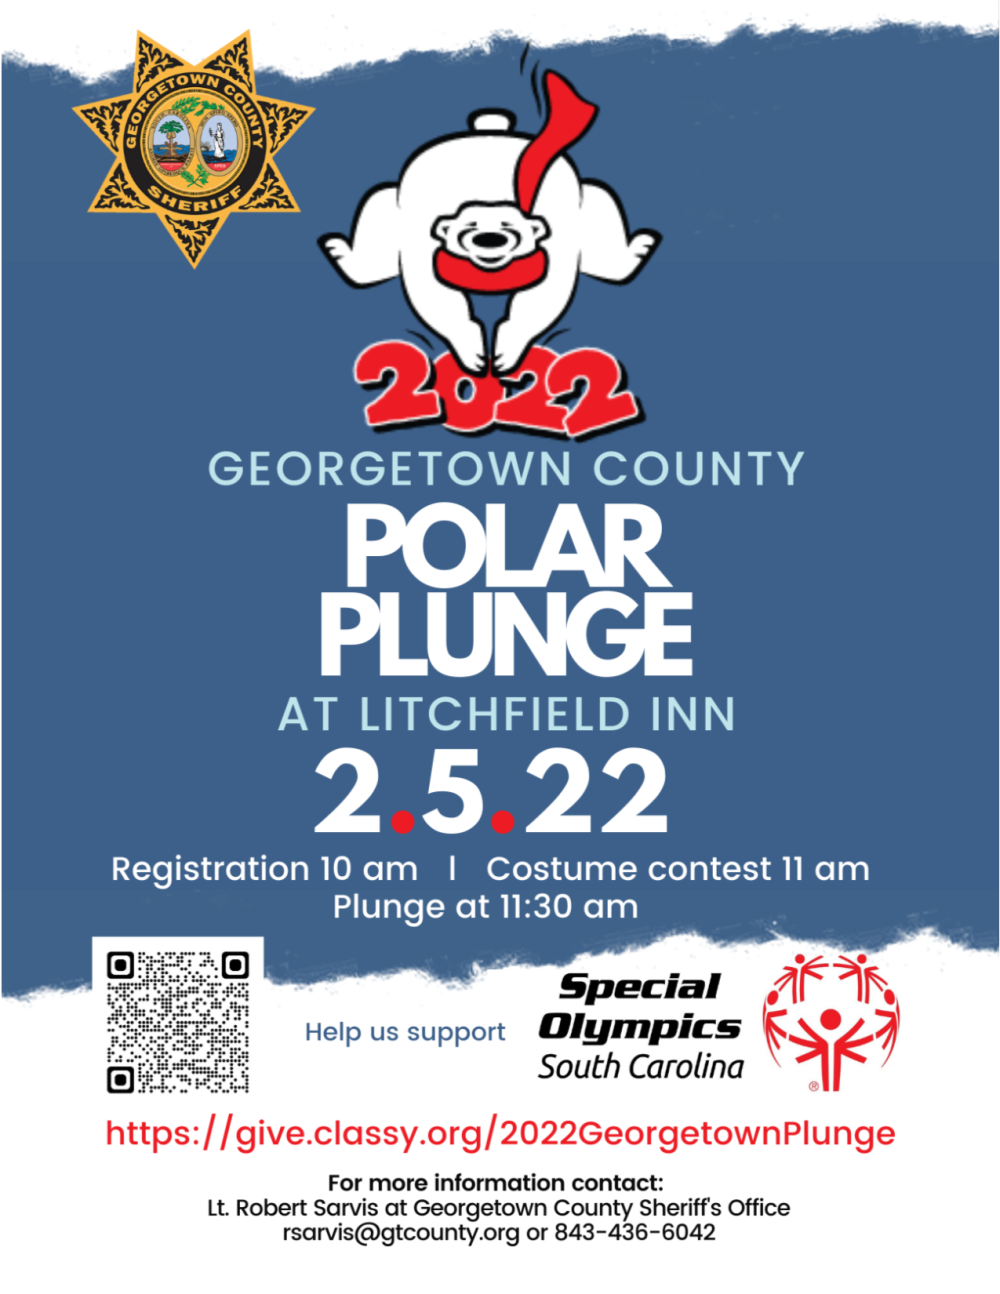 11.19.21 Second Annual Polar Plunge is on the way 